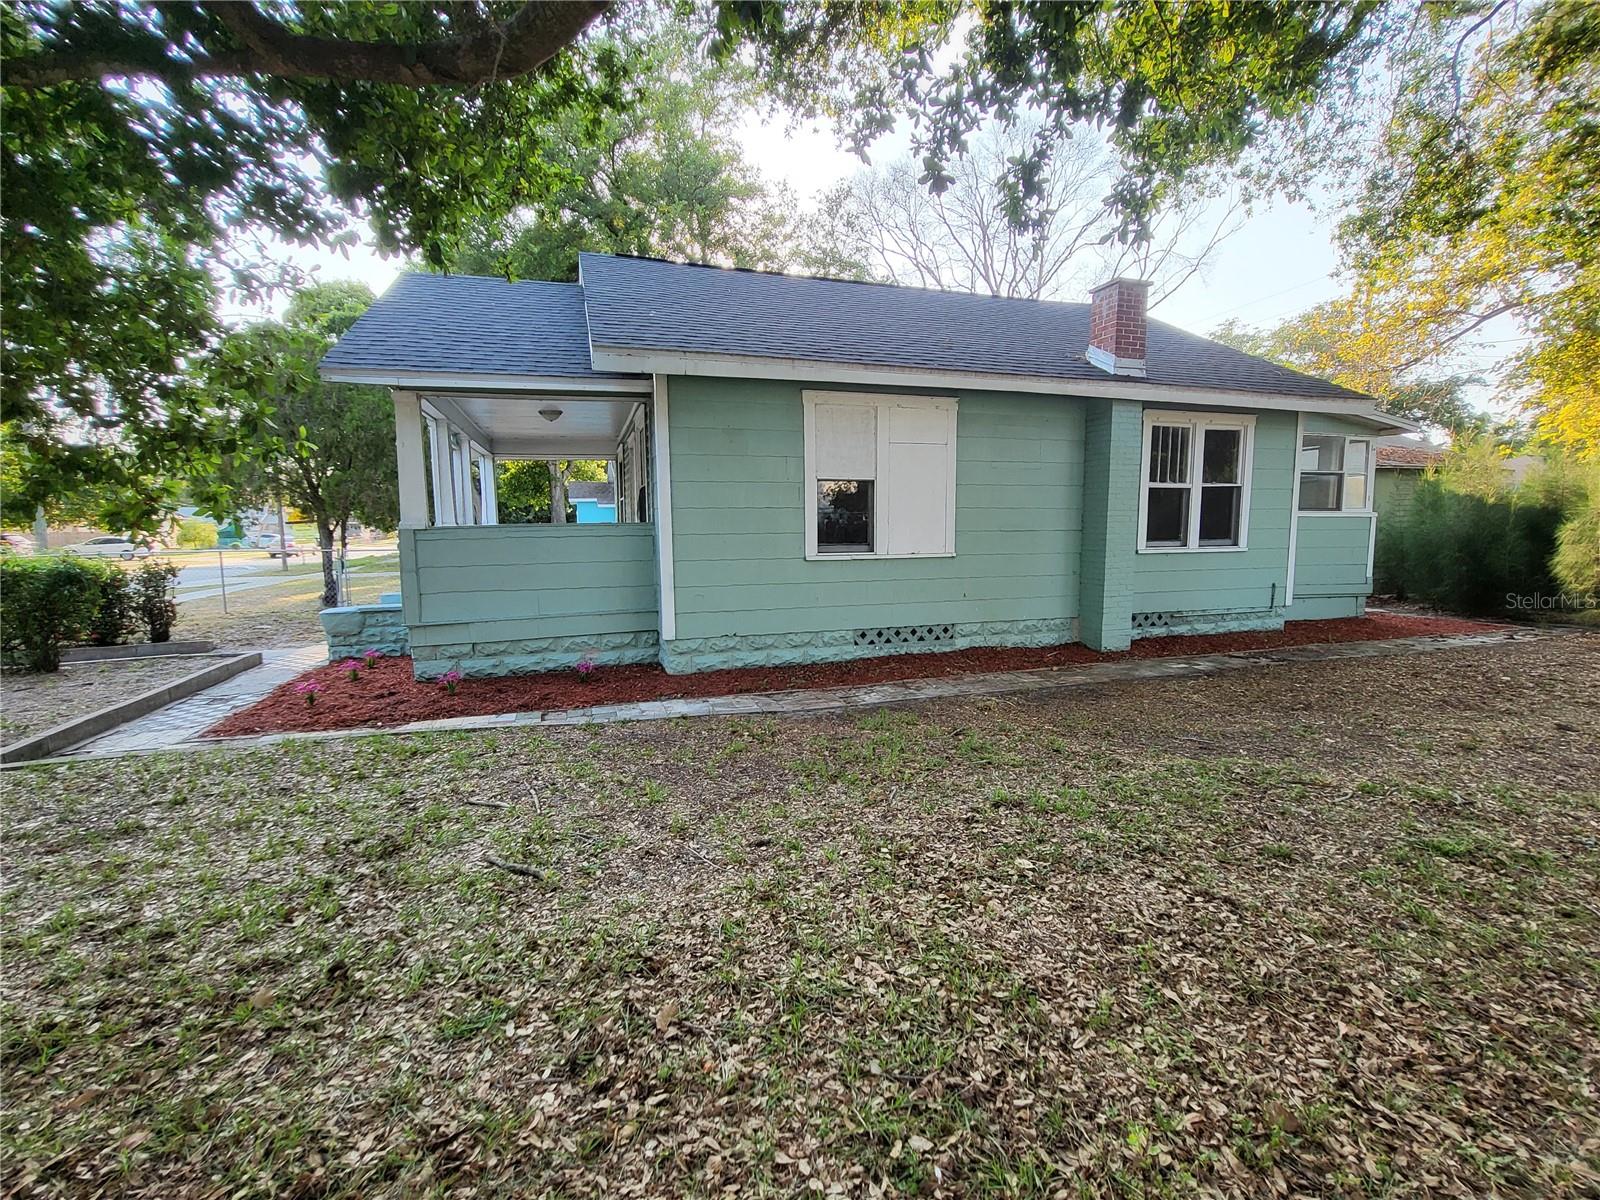 Side view of house.  Roof replaced in 2019!  Add a fence from front to back to fully fence the property.  Vacant lot next door within the fenced area is NOT included.